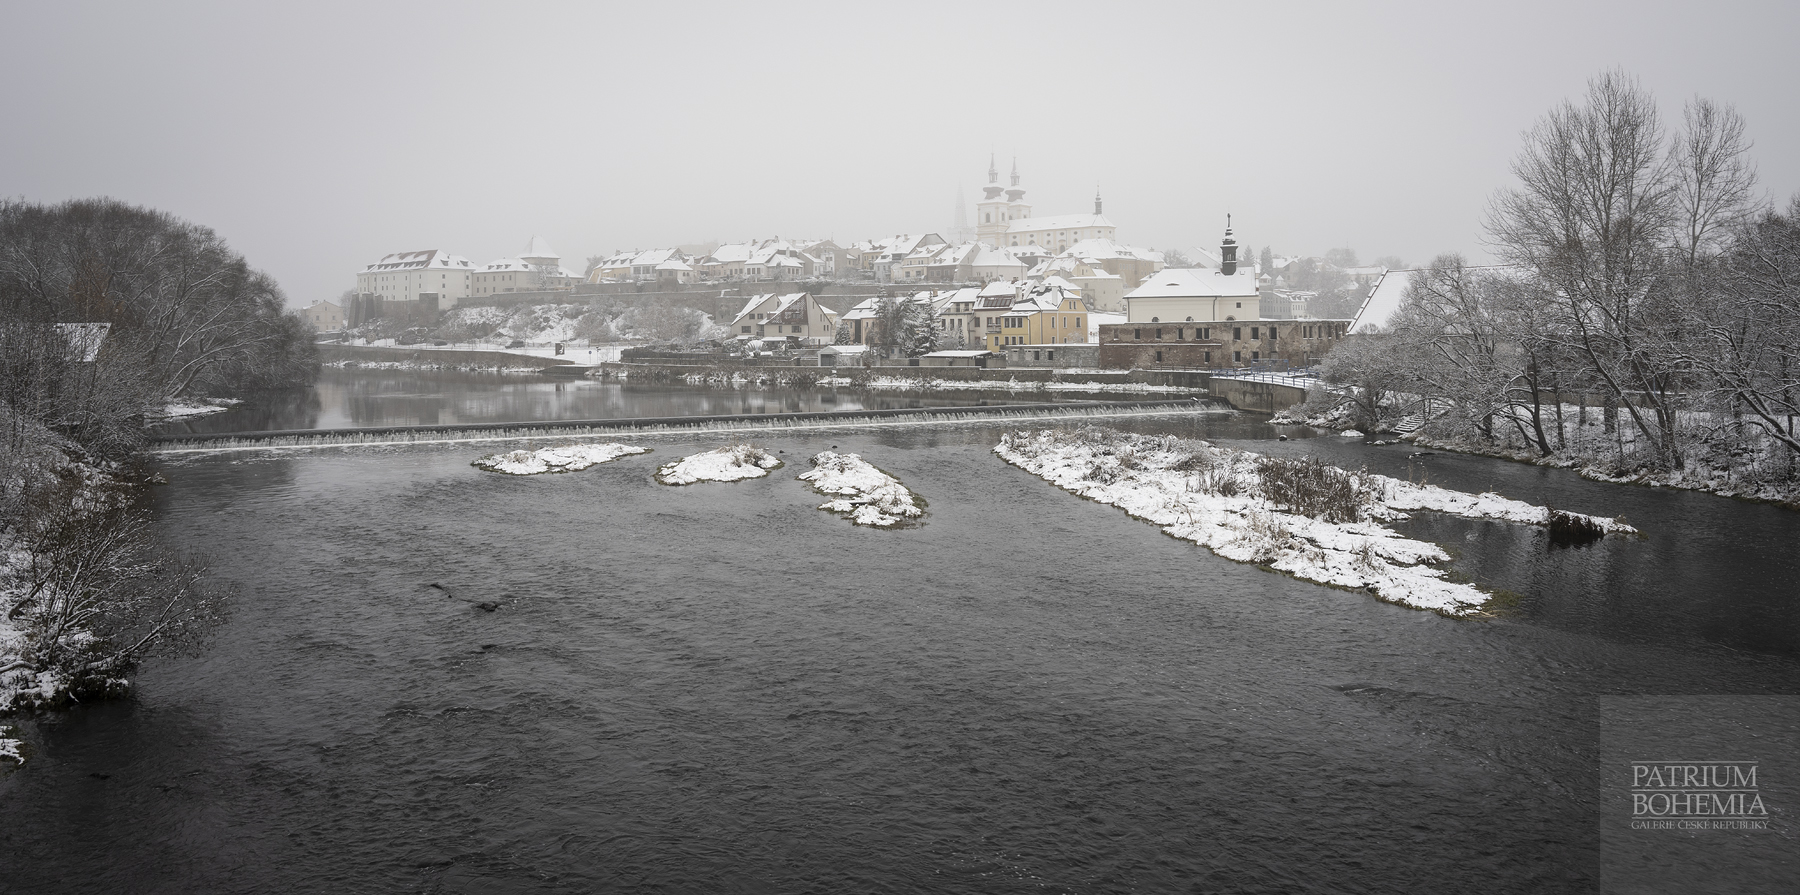 Ohre river and part of the snow-covered town Kadan in winter, Kadan castle on the left.